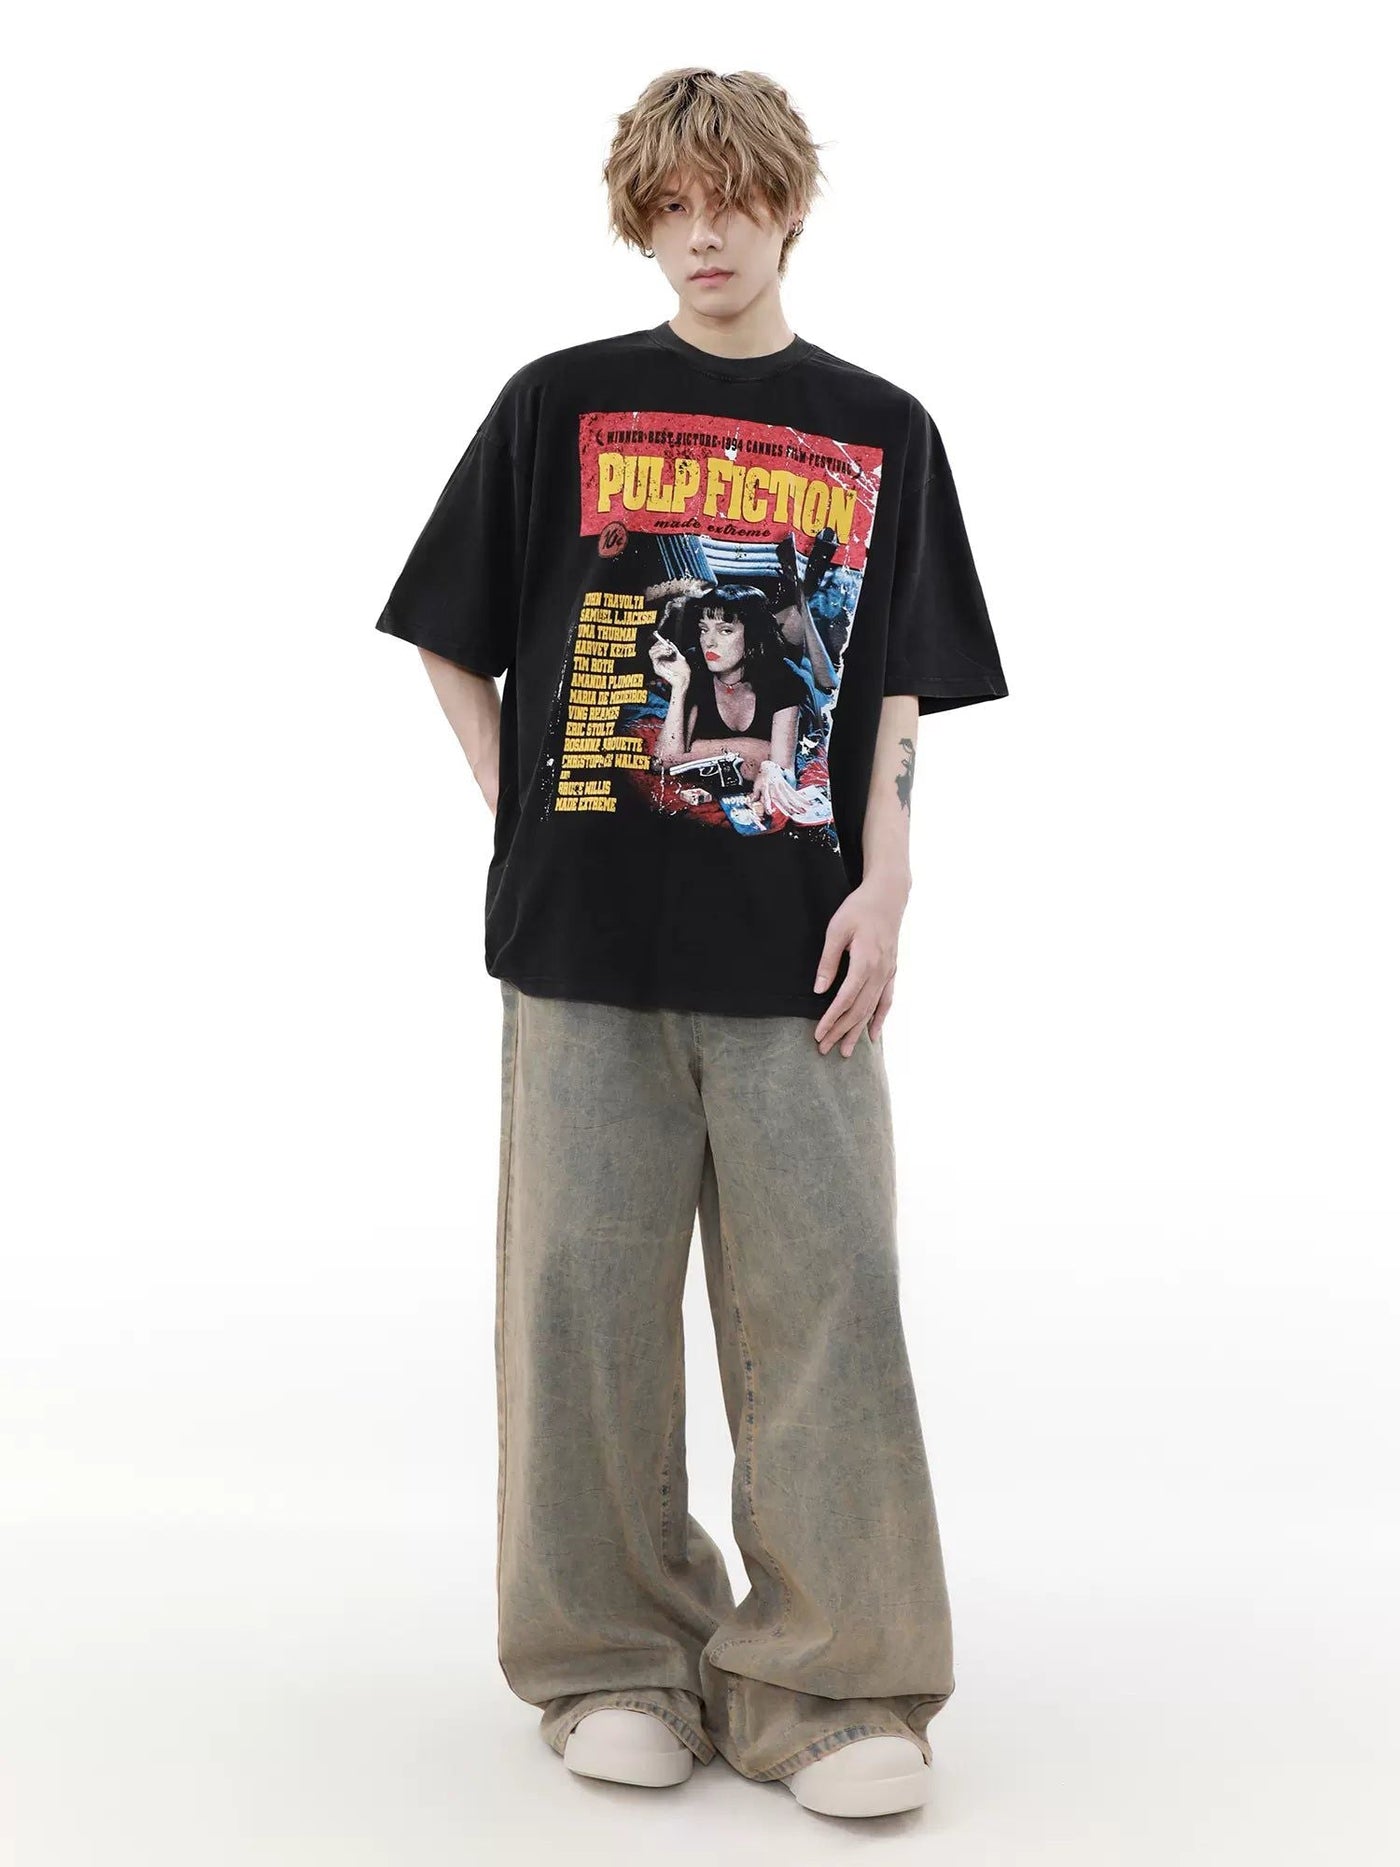 Pulp Fiction Poster T-Shirt Korean Street Fashion T-Shirt By Mr Nearly Shop Online at OH Vault